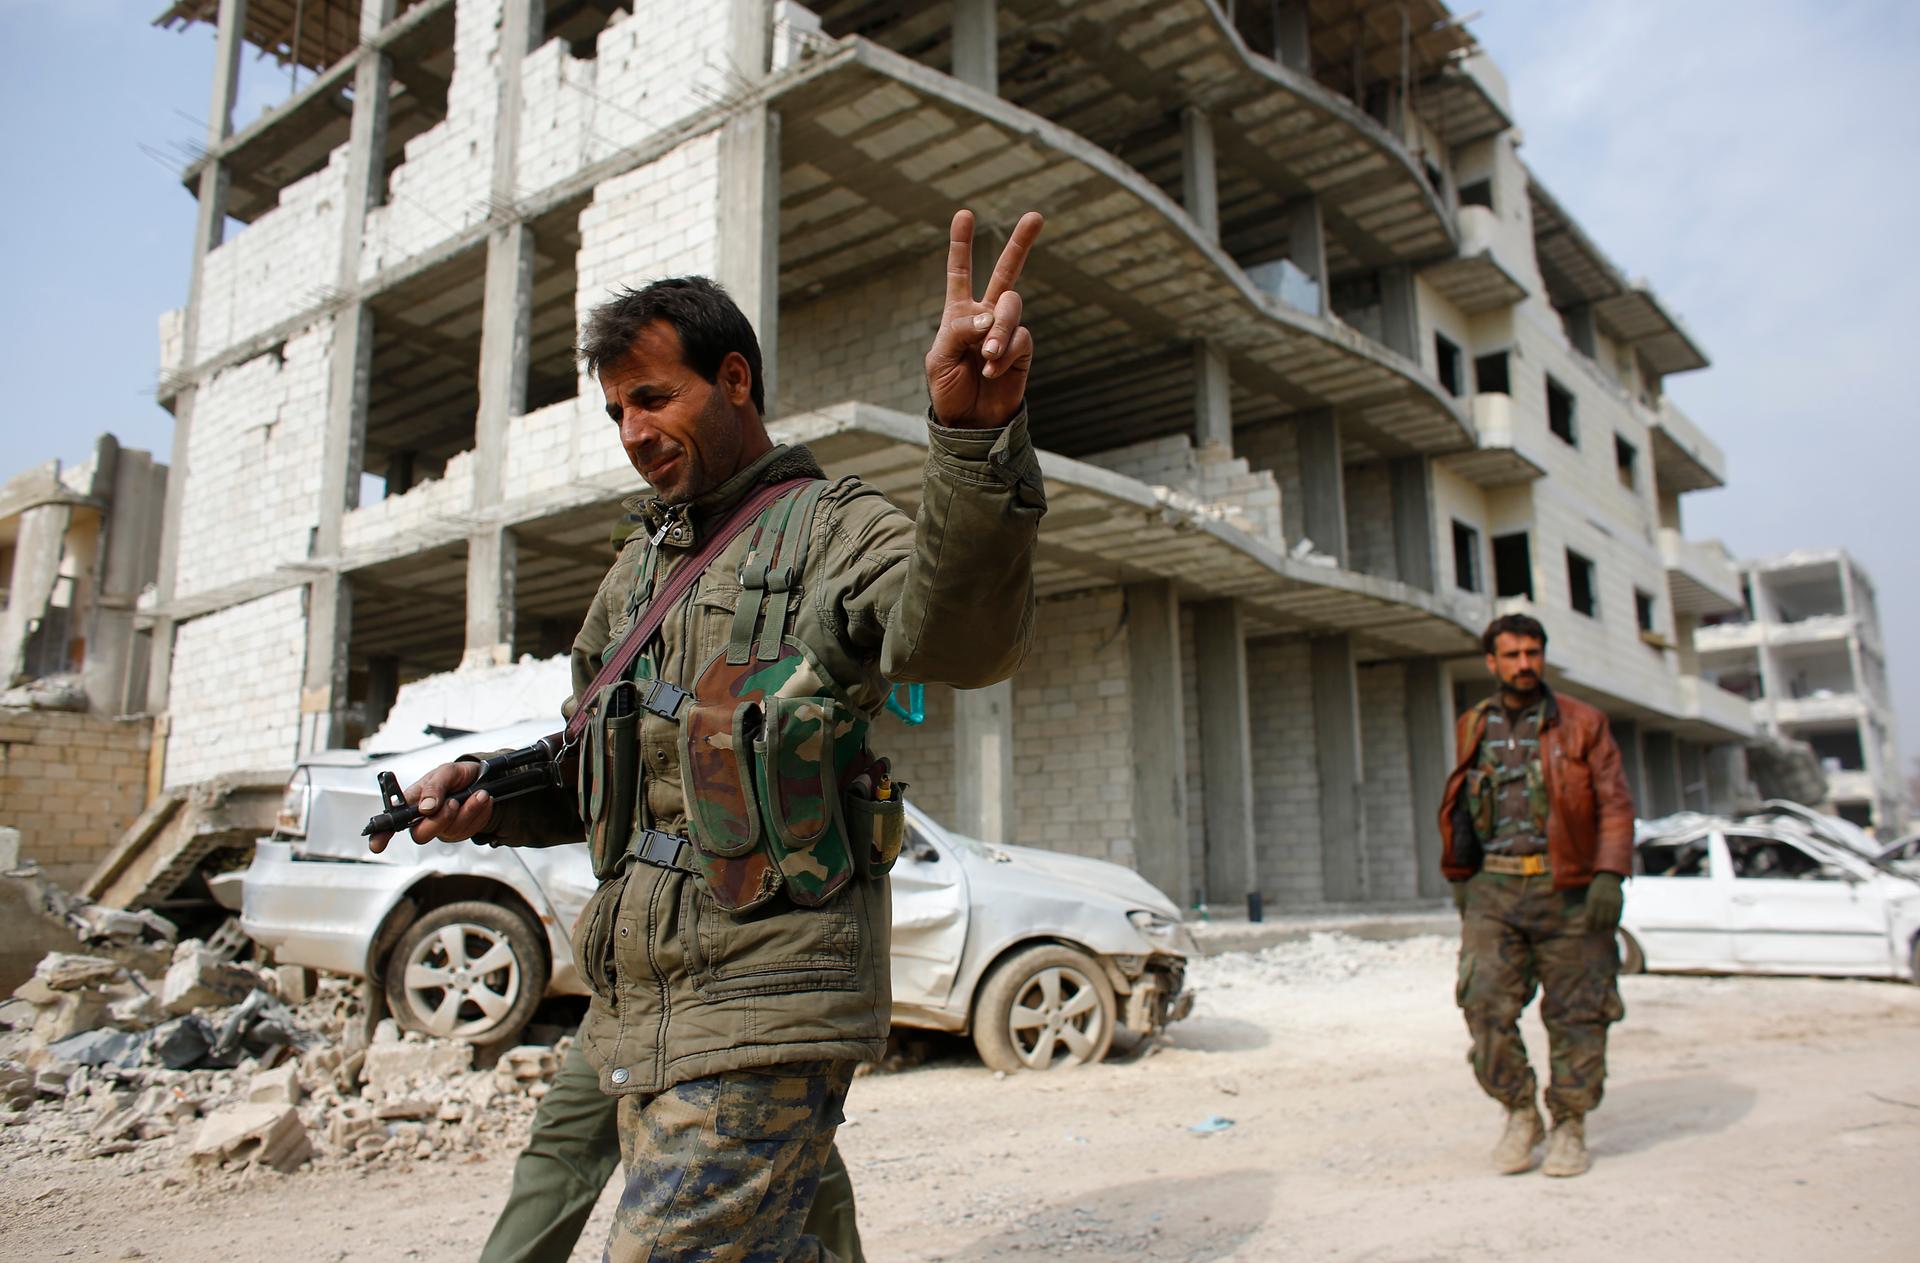 A fighter from the Kurdish People's Protection Units, or YPG, flashes a victory sign as he patrols the streets in the northern Syrian town of Kobane on January 28, 2015.